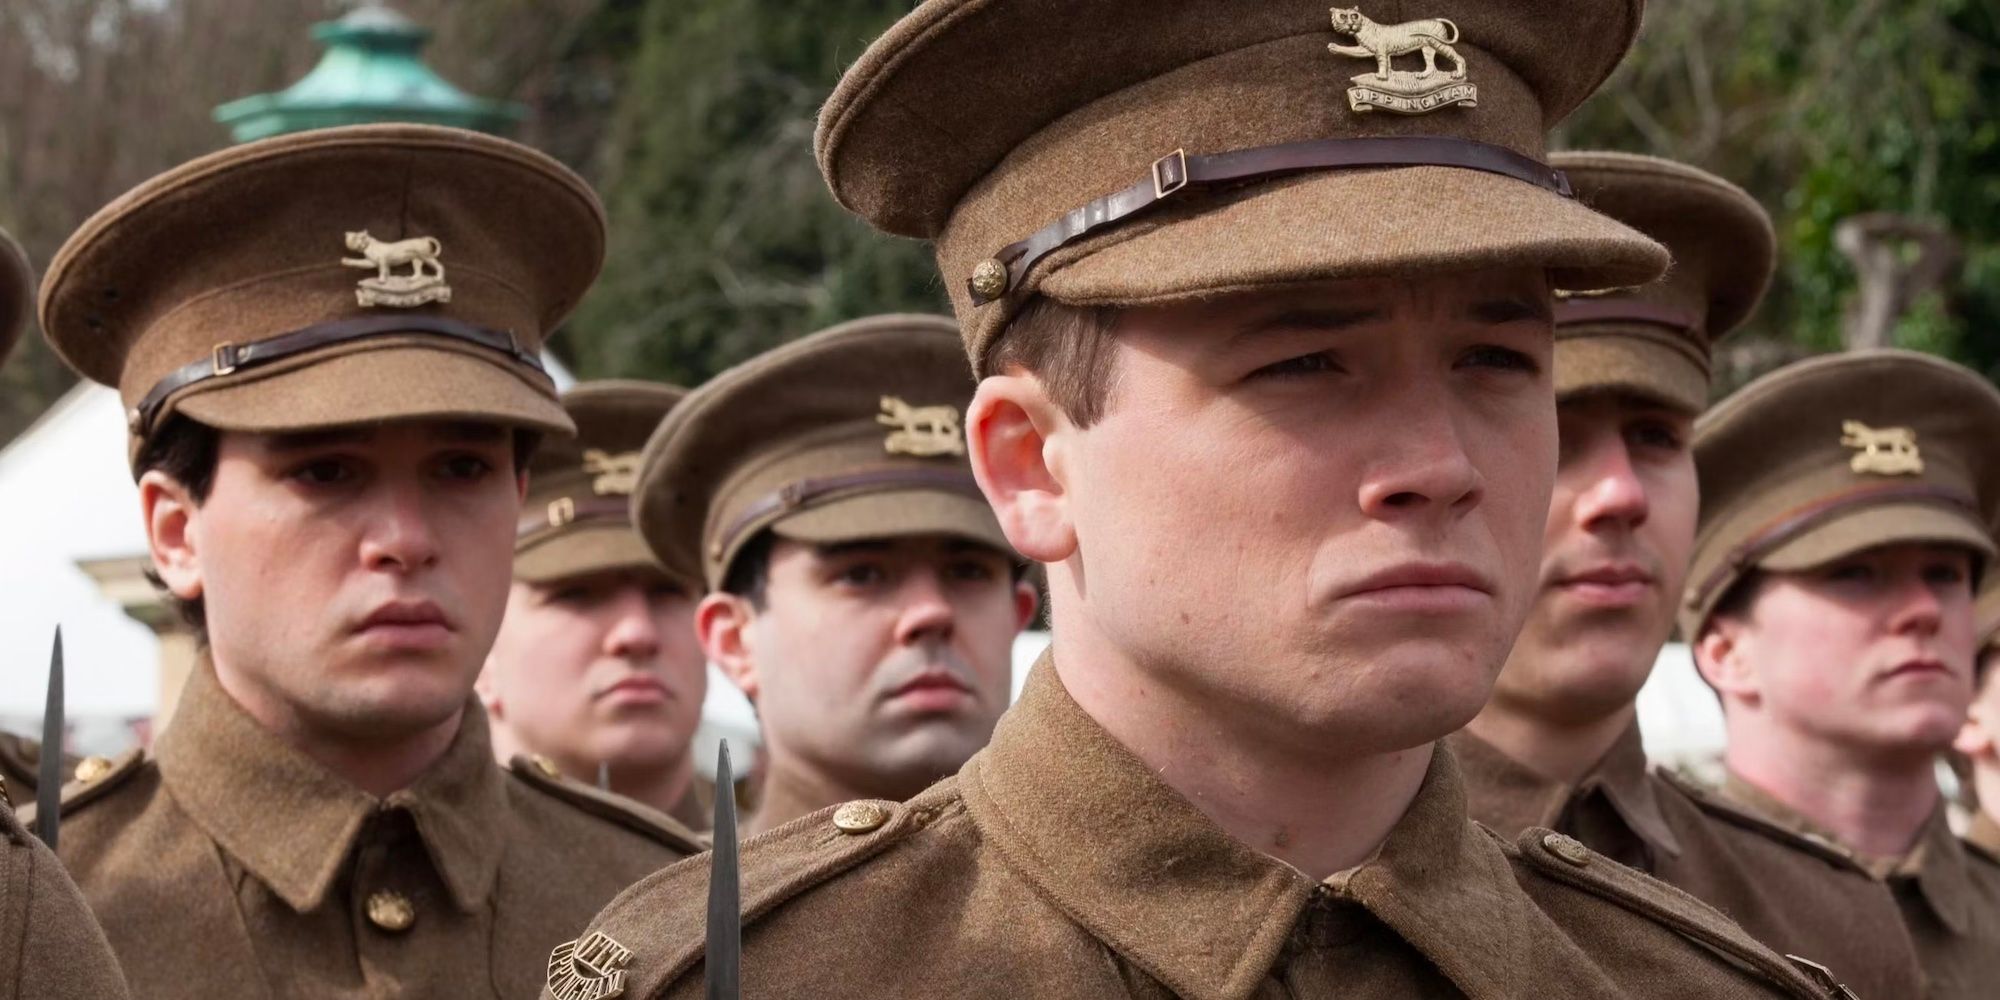 Taron Egerton in uniform in Testament of Youth with Kit Harringon in background